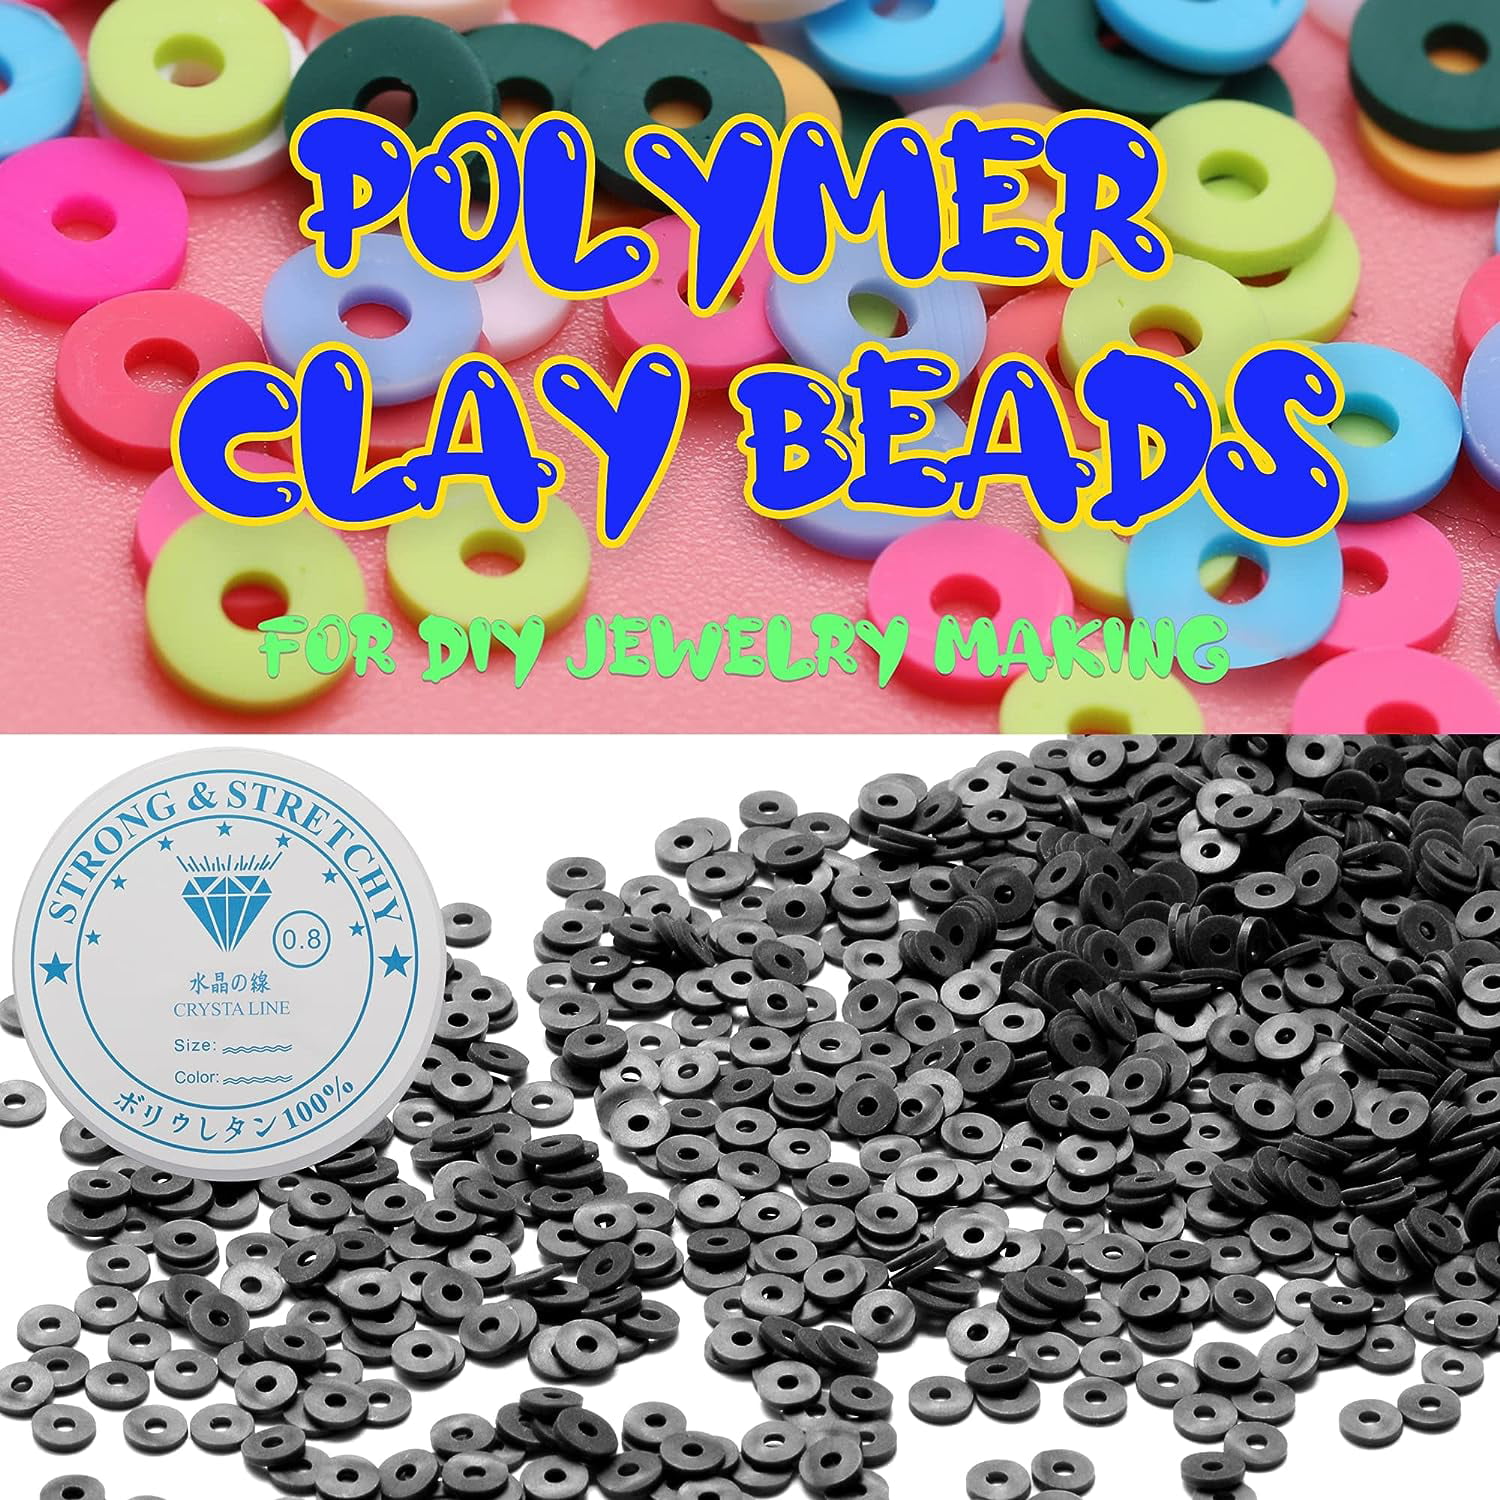 3600 Pcs Black Clay Beads for Bracelets Making, 10 Strands Flat Round Polymer Clay Beads 6mm Spacer Heishi Beads for Jewelry Making Earring Necklace